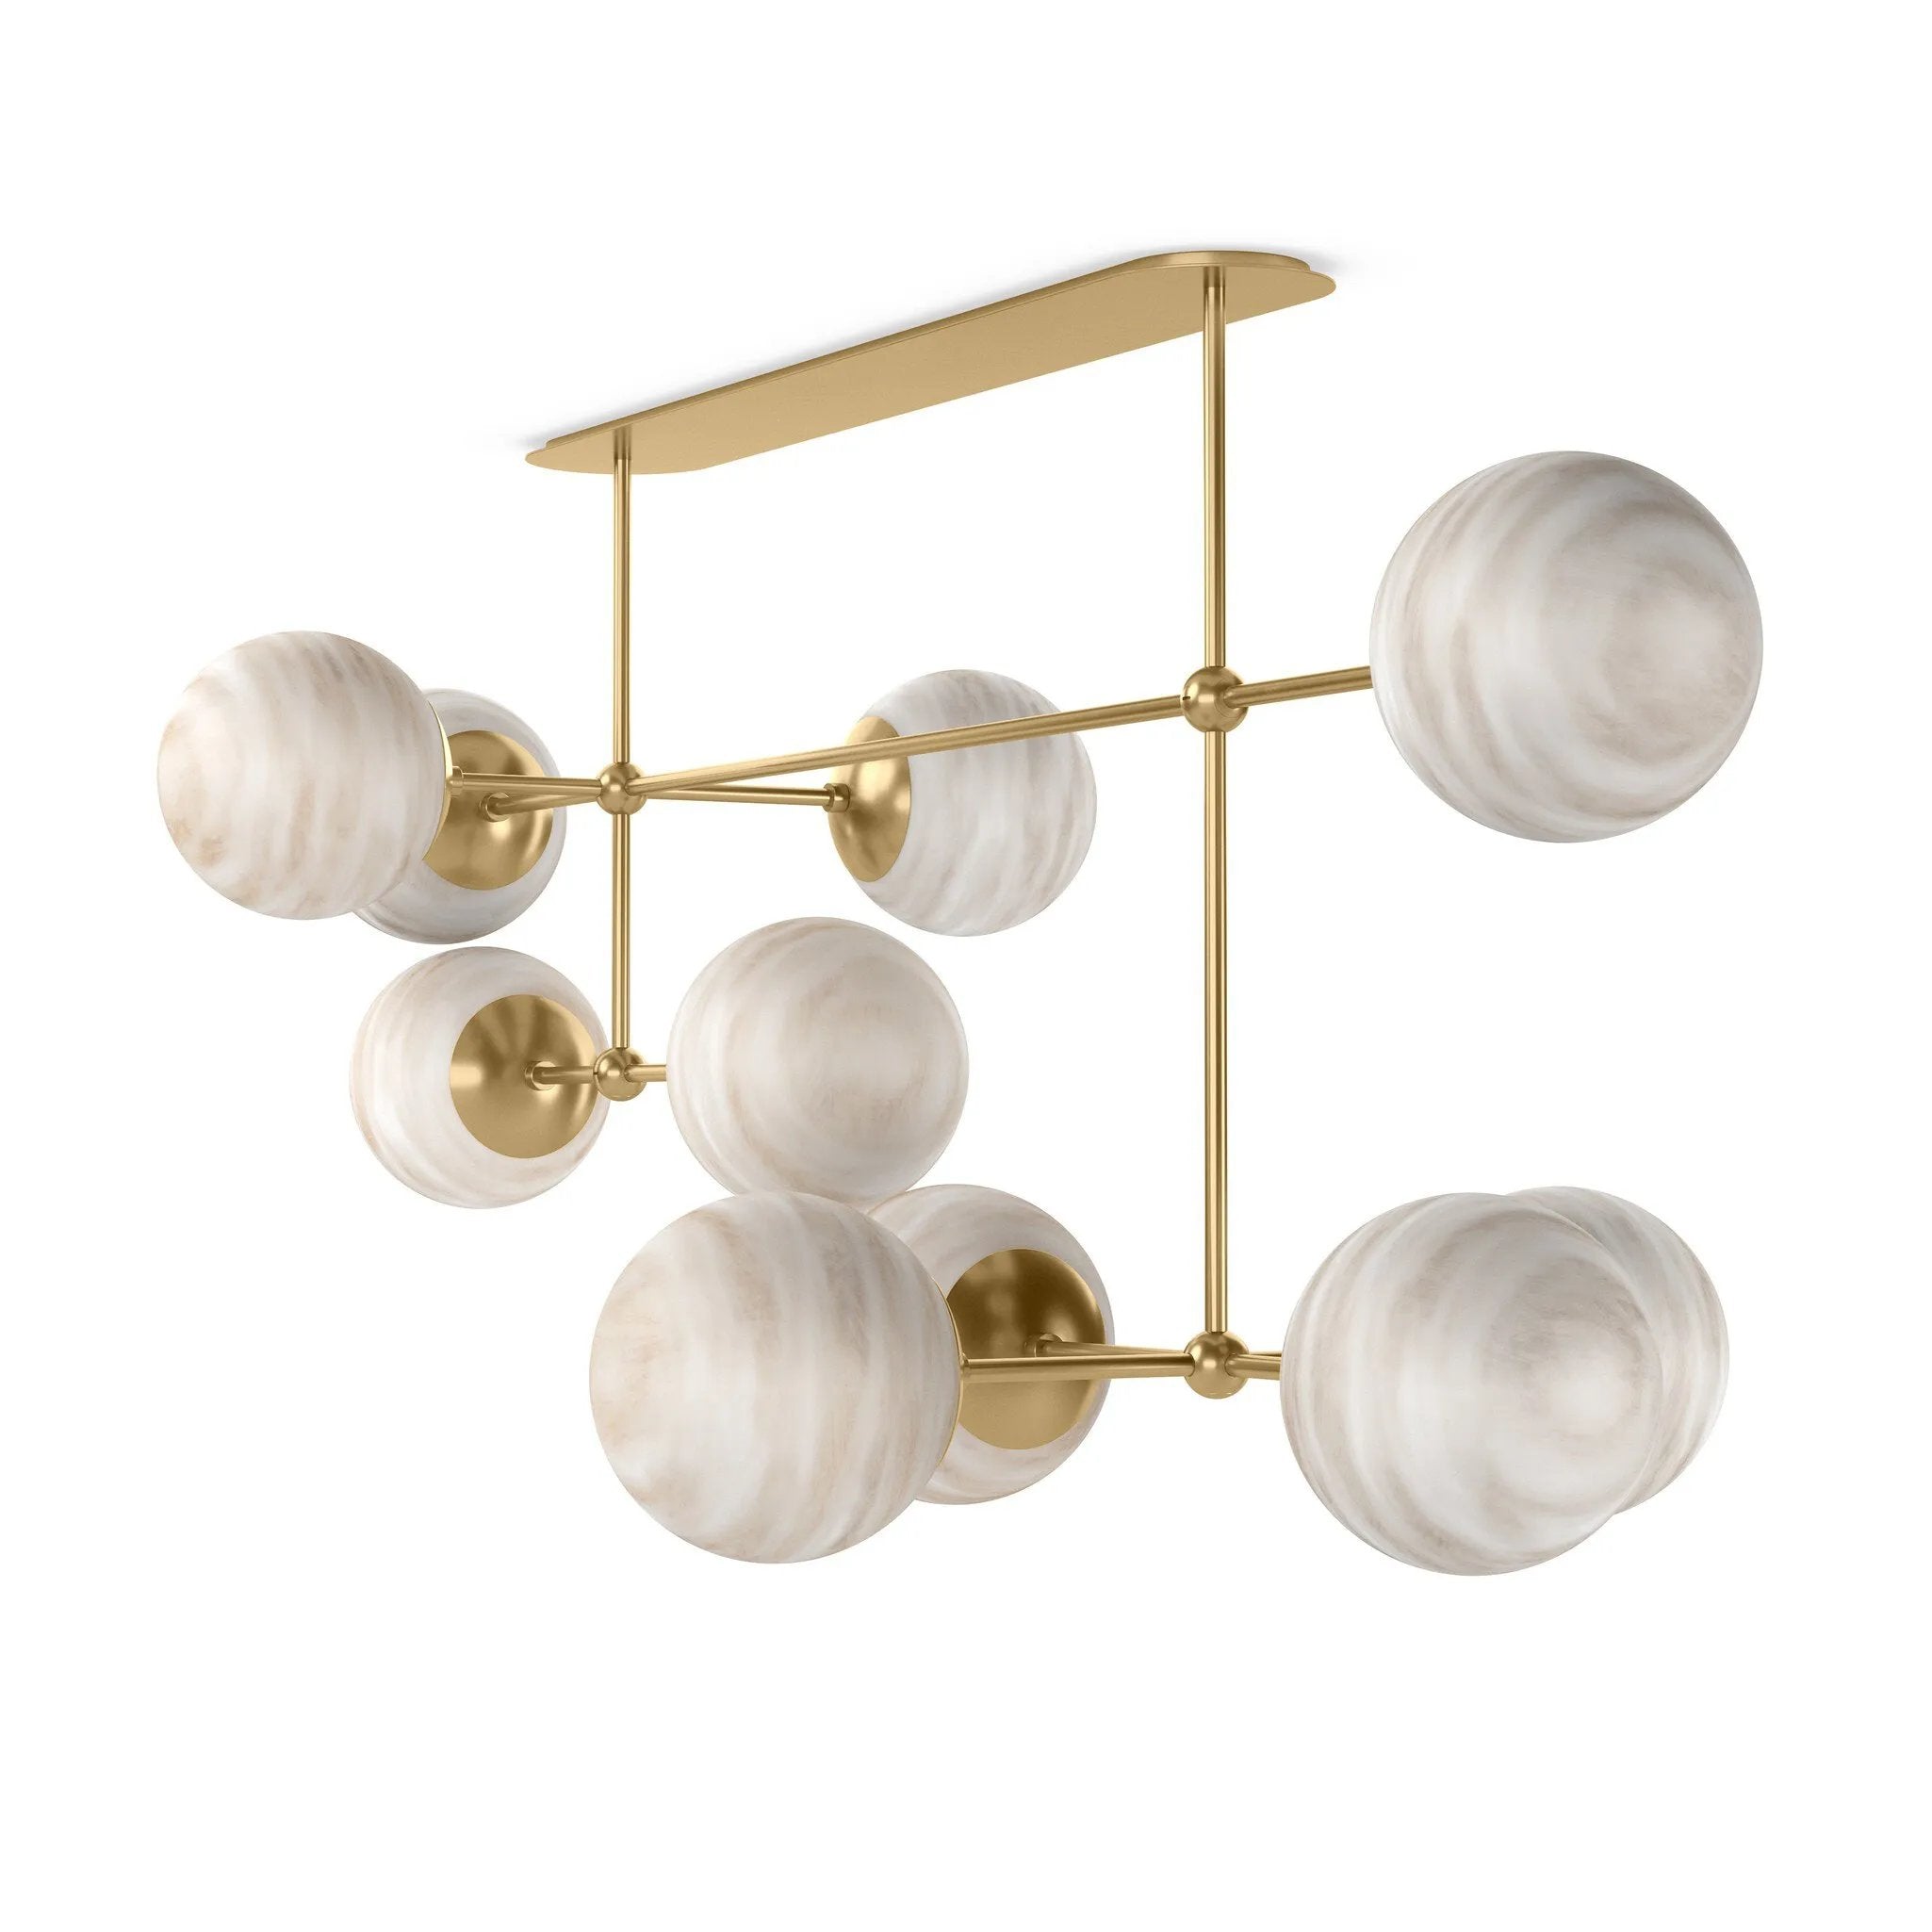 Marbled glass spheres seem to extend and reach across smooth brass rods. Each globe is individually blown, shaped and sculpted by hand through a one-hour process. Brass and glass are 98% recyclable. Designed and sustainably made in Poland by Schwung.Overall Dimensions64.25"w x 30.25"d x 28.75"hFull Details &amp; SpecificationsTear Shee Amethyst Home provides interior design, new home construction design consulting, vintage area rugs, and lighting in the Austin metro area.